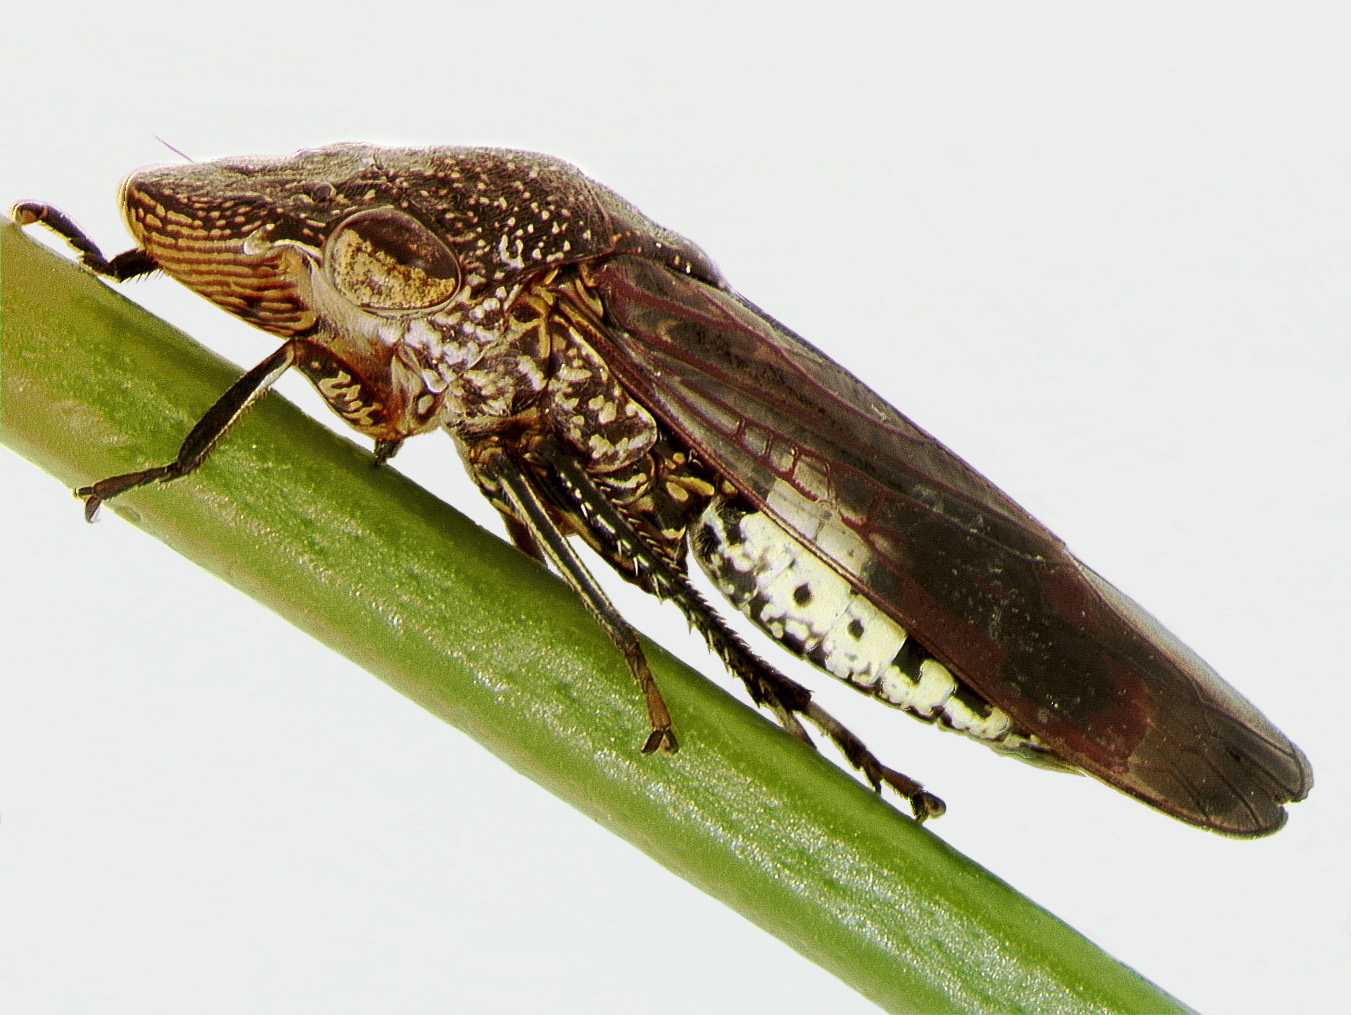 How CRISPR could help save crops from devastation caused by pests